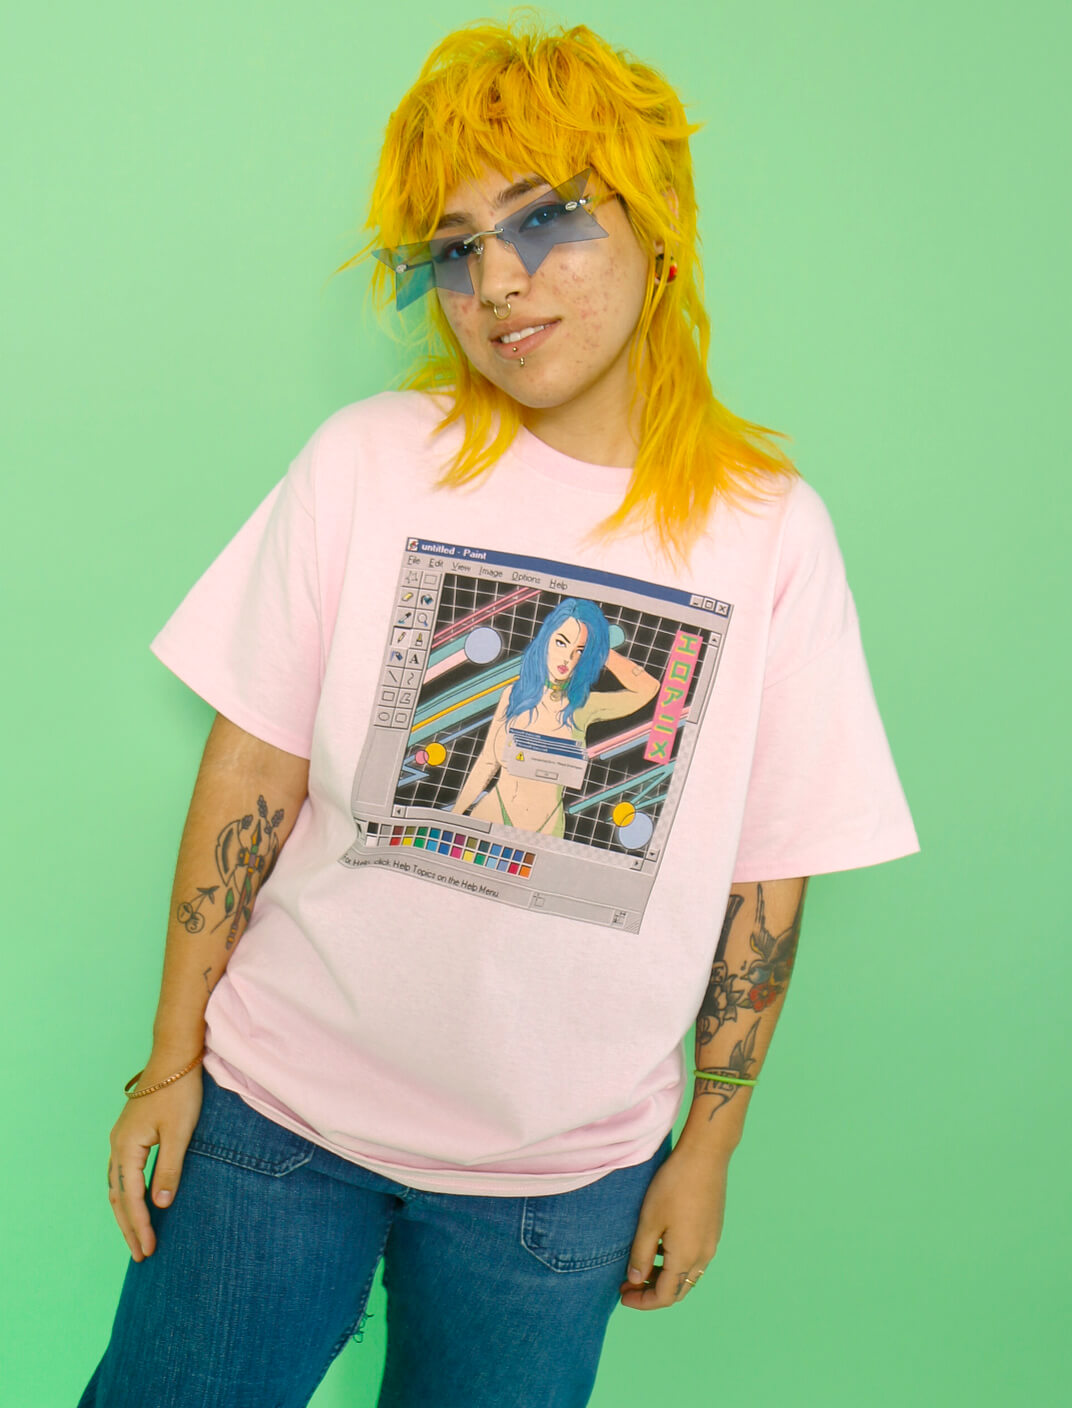 MS paint old web retrotech vaporwave sexy babe graphic t-shirt.